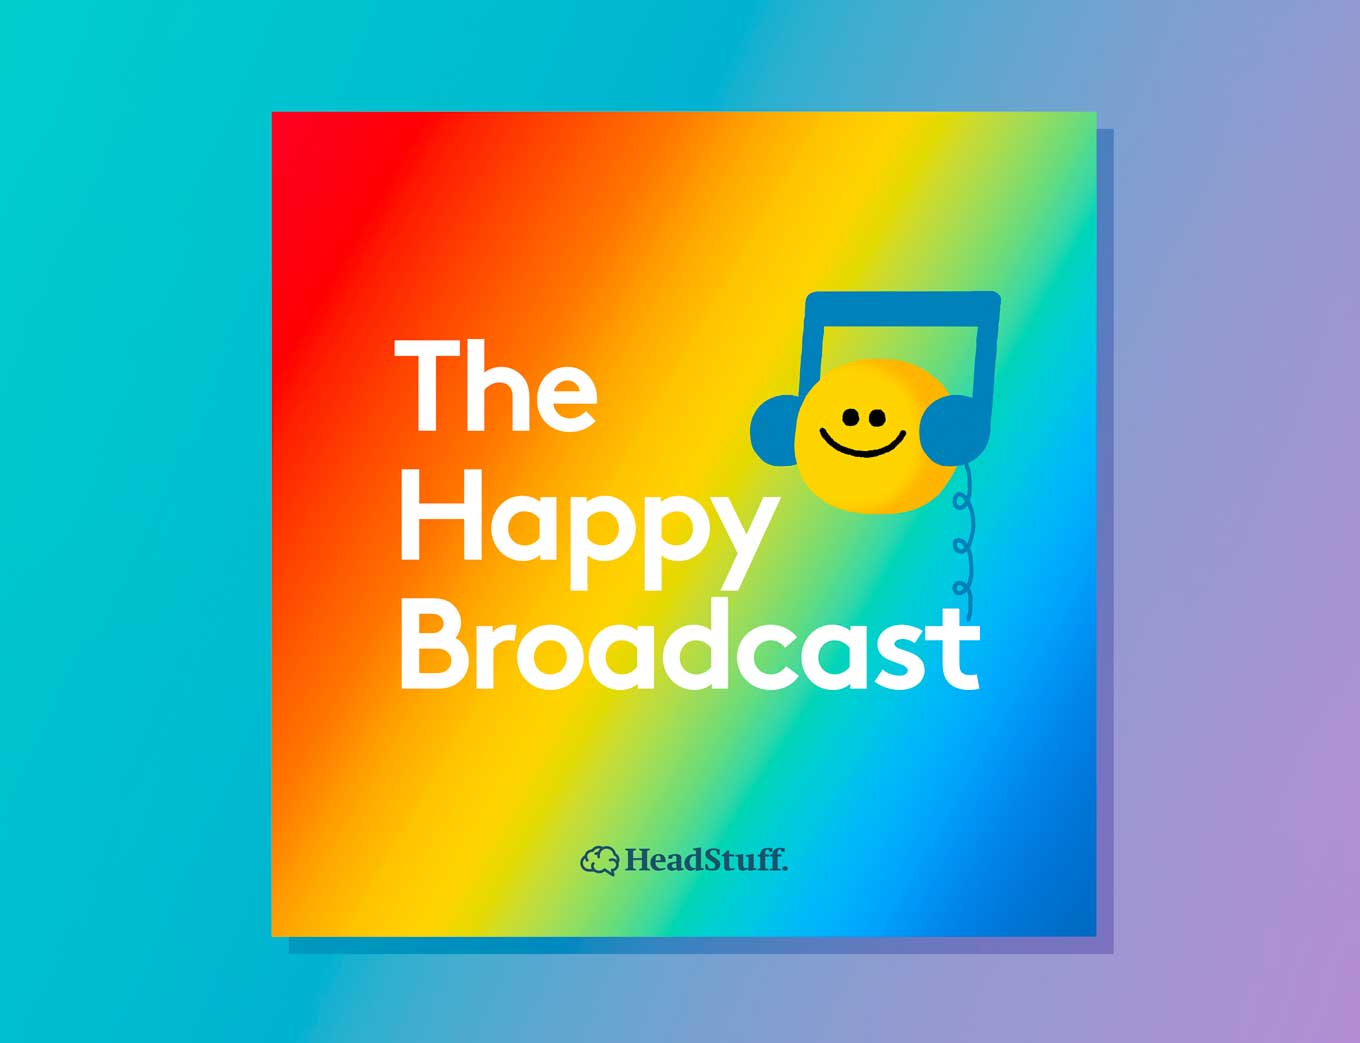 Podcast Artwork: The Happy Broadcast by Headstuff